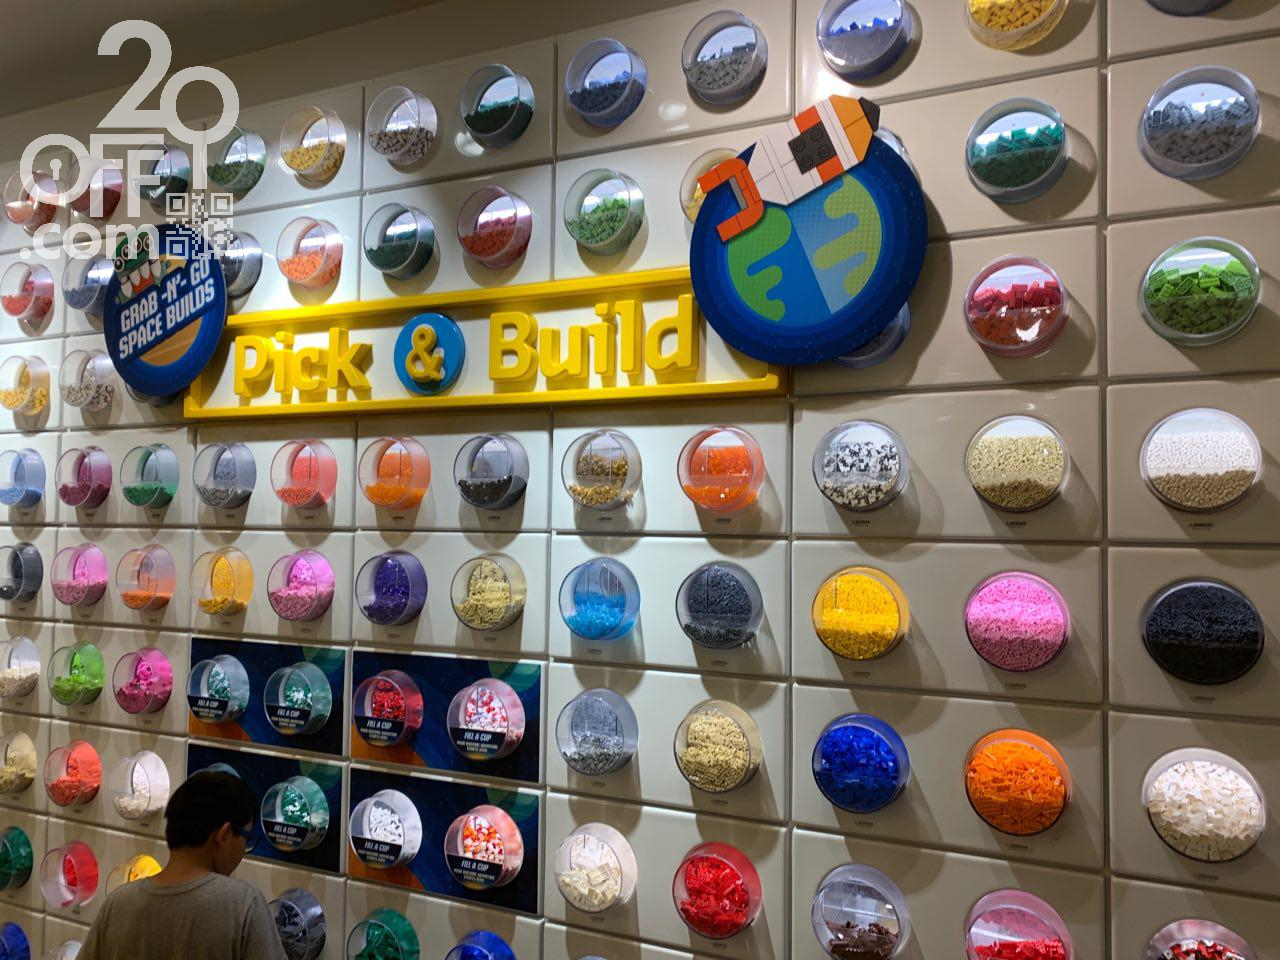 LEGO Pick And Build Wall